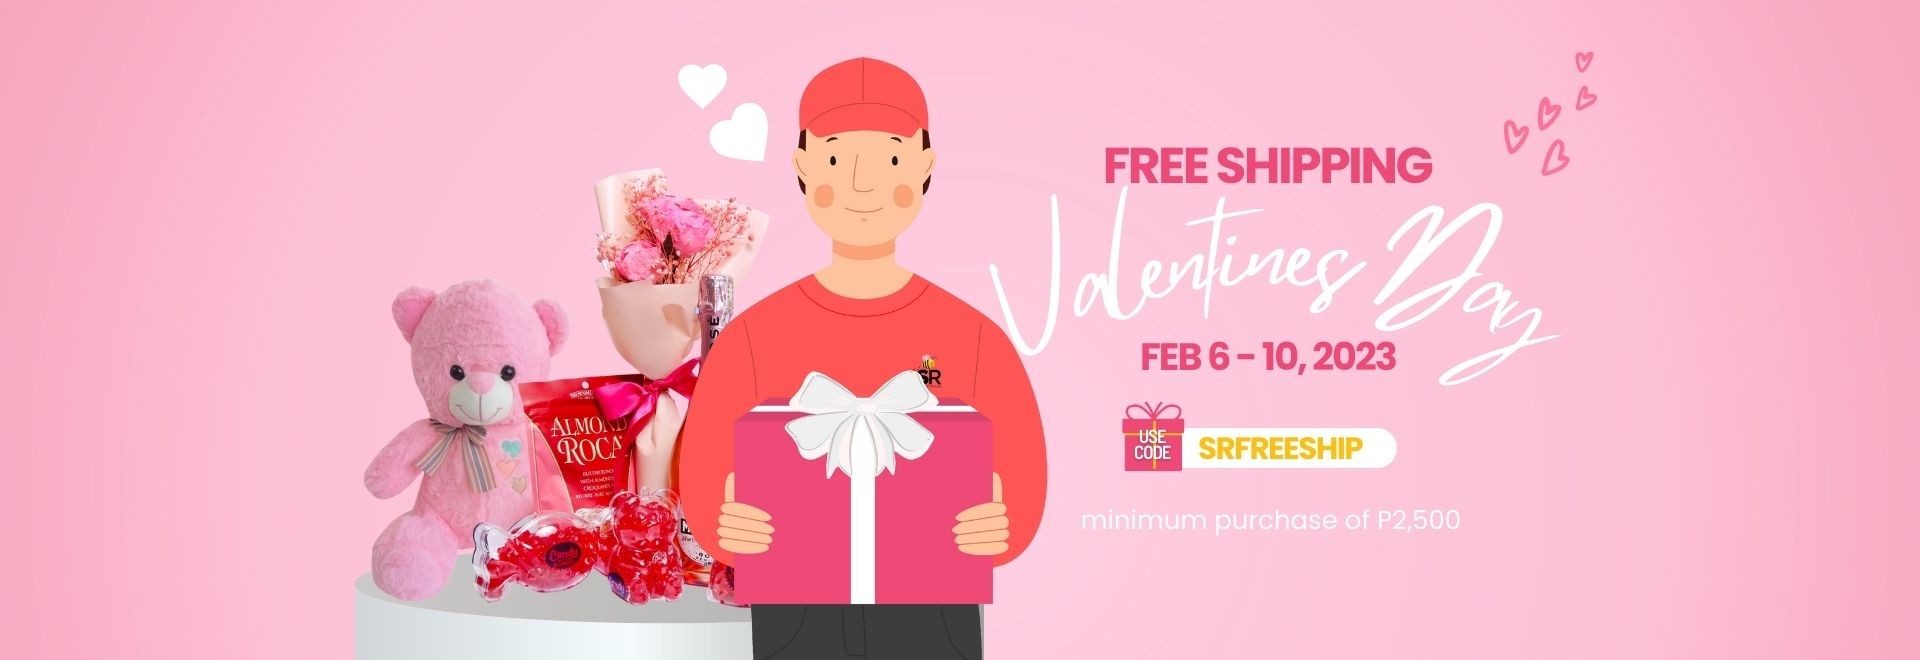 Valentine's day Free Shipping